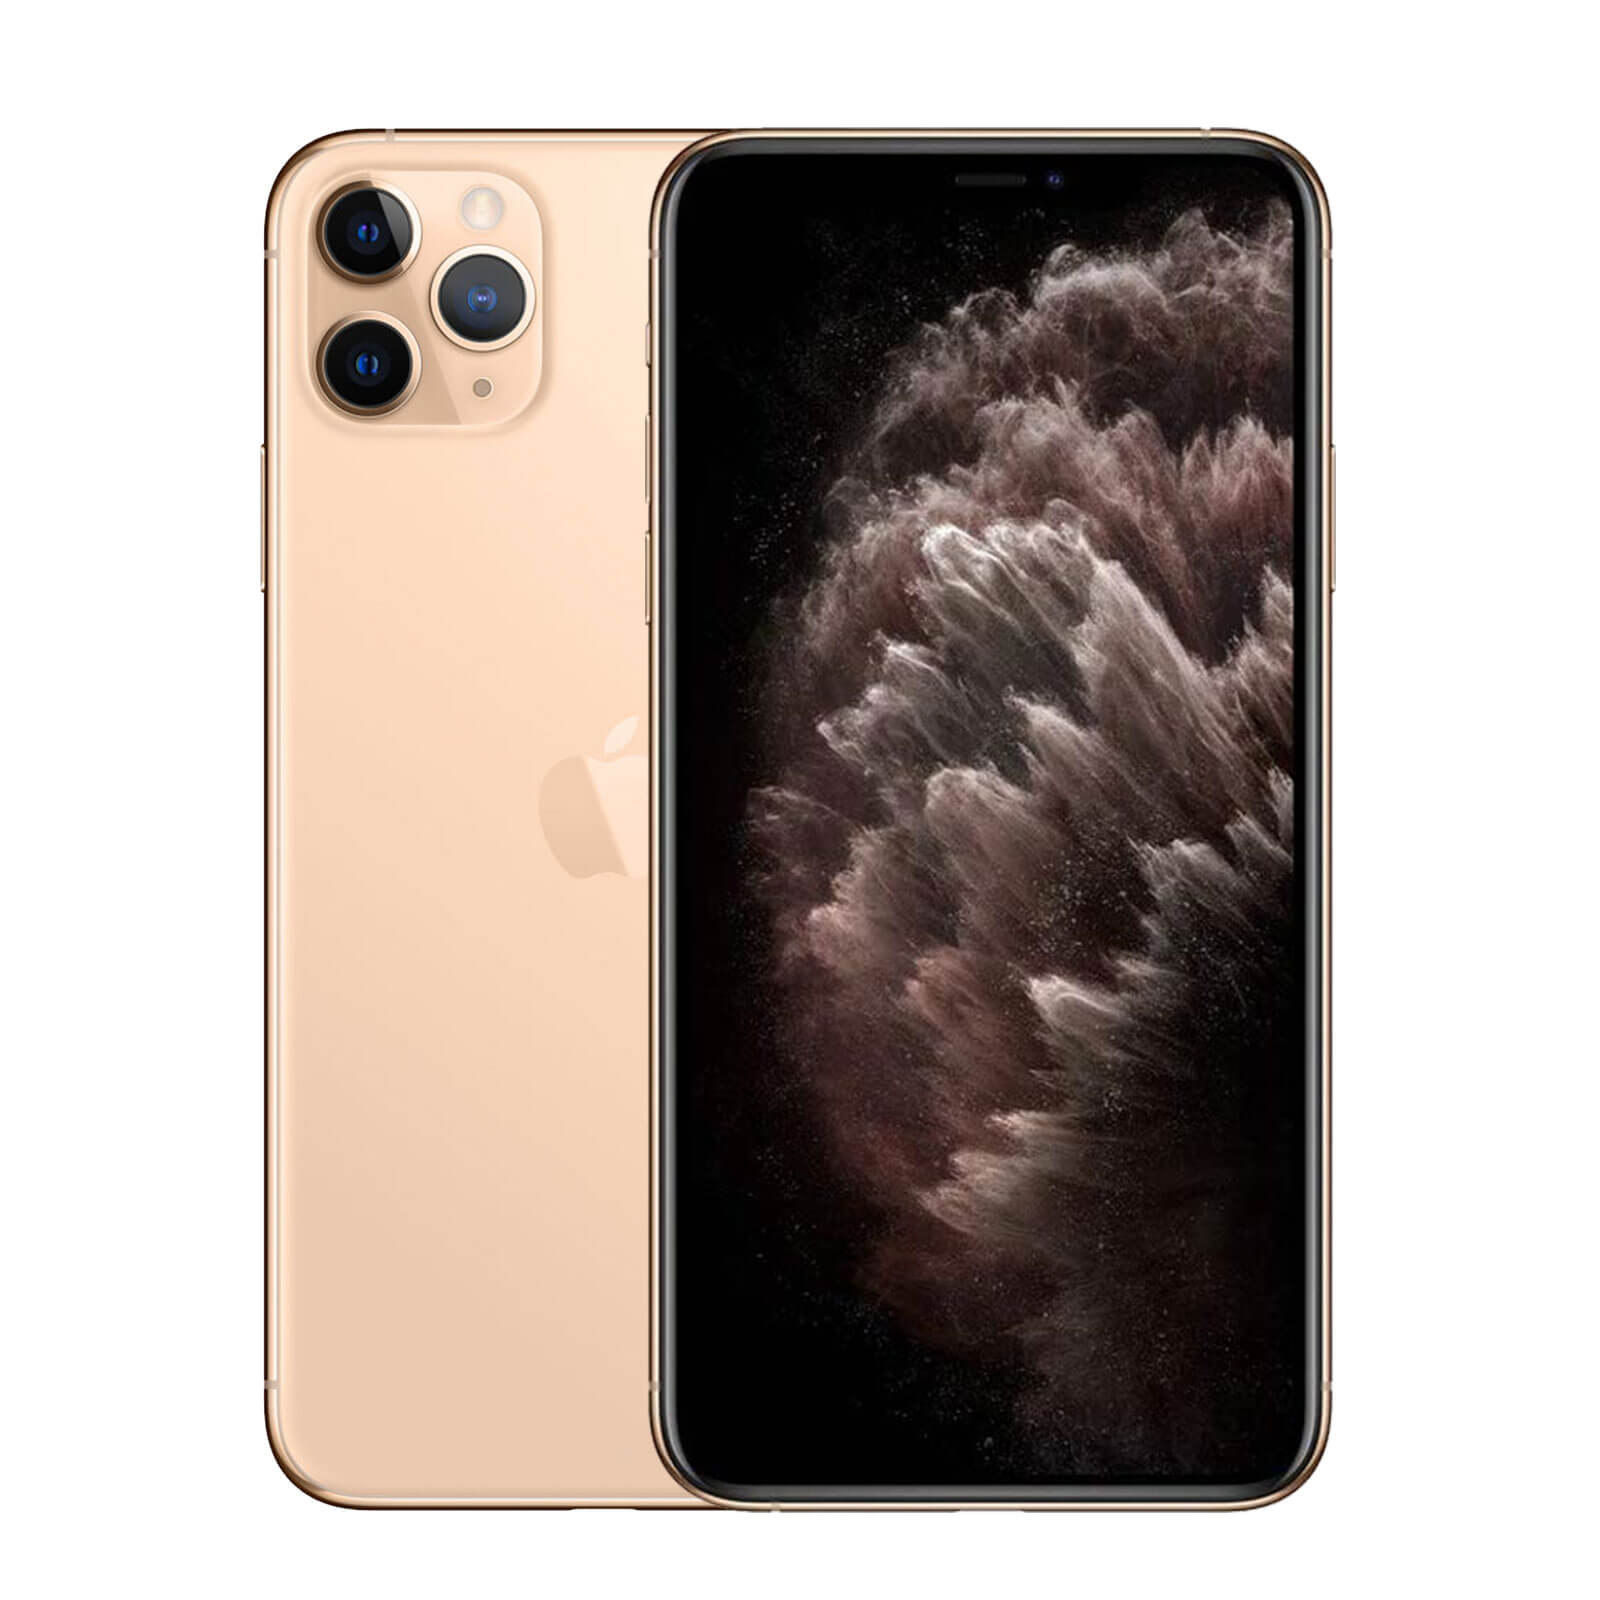 Apple iPhone 11 Pro 512GB Gold Good - T-Mobile